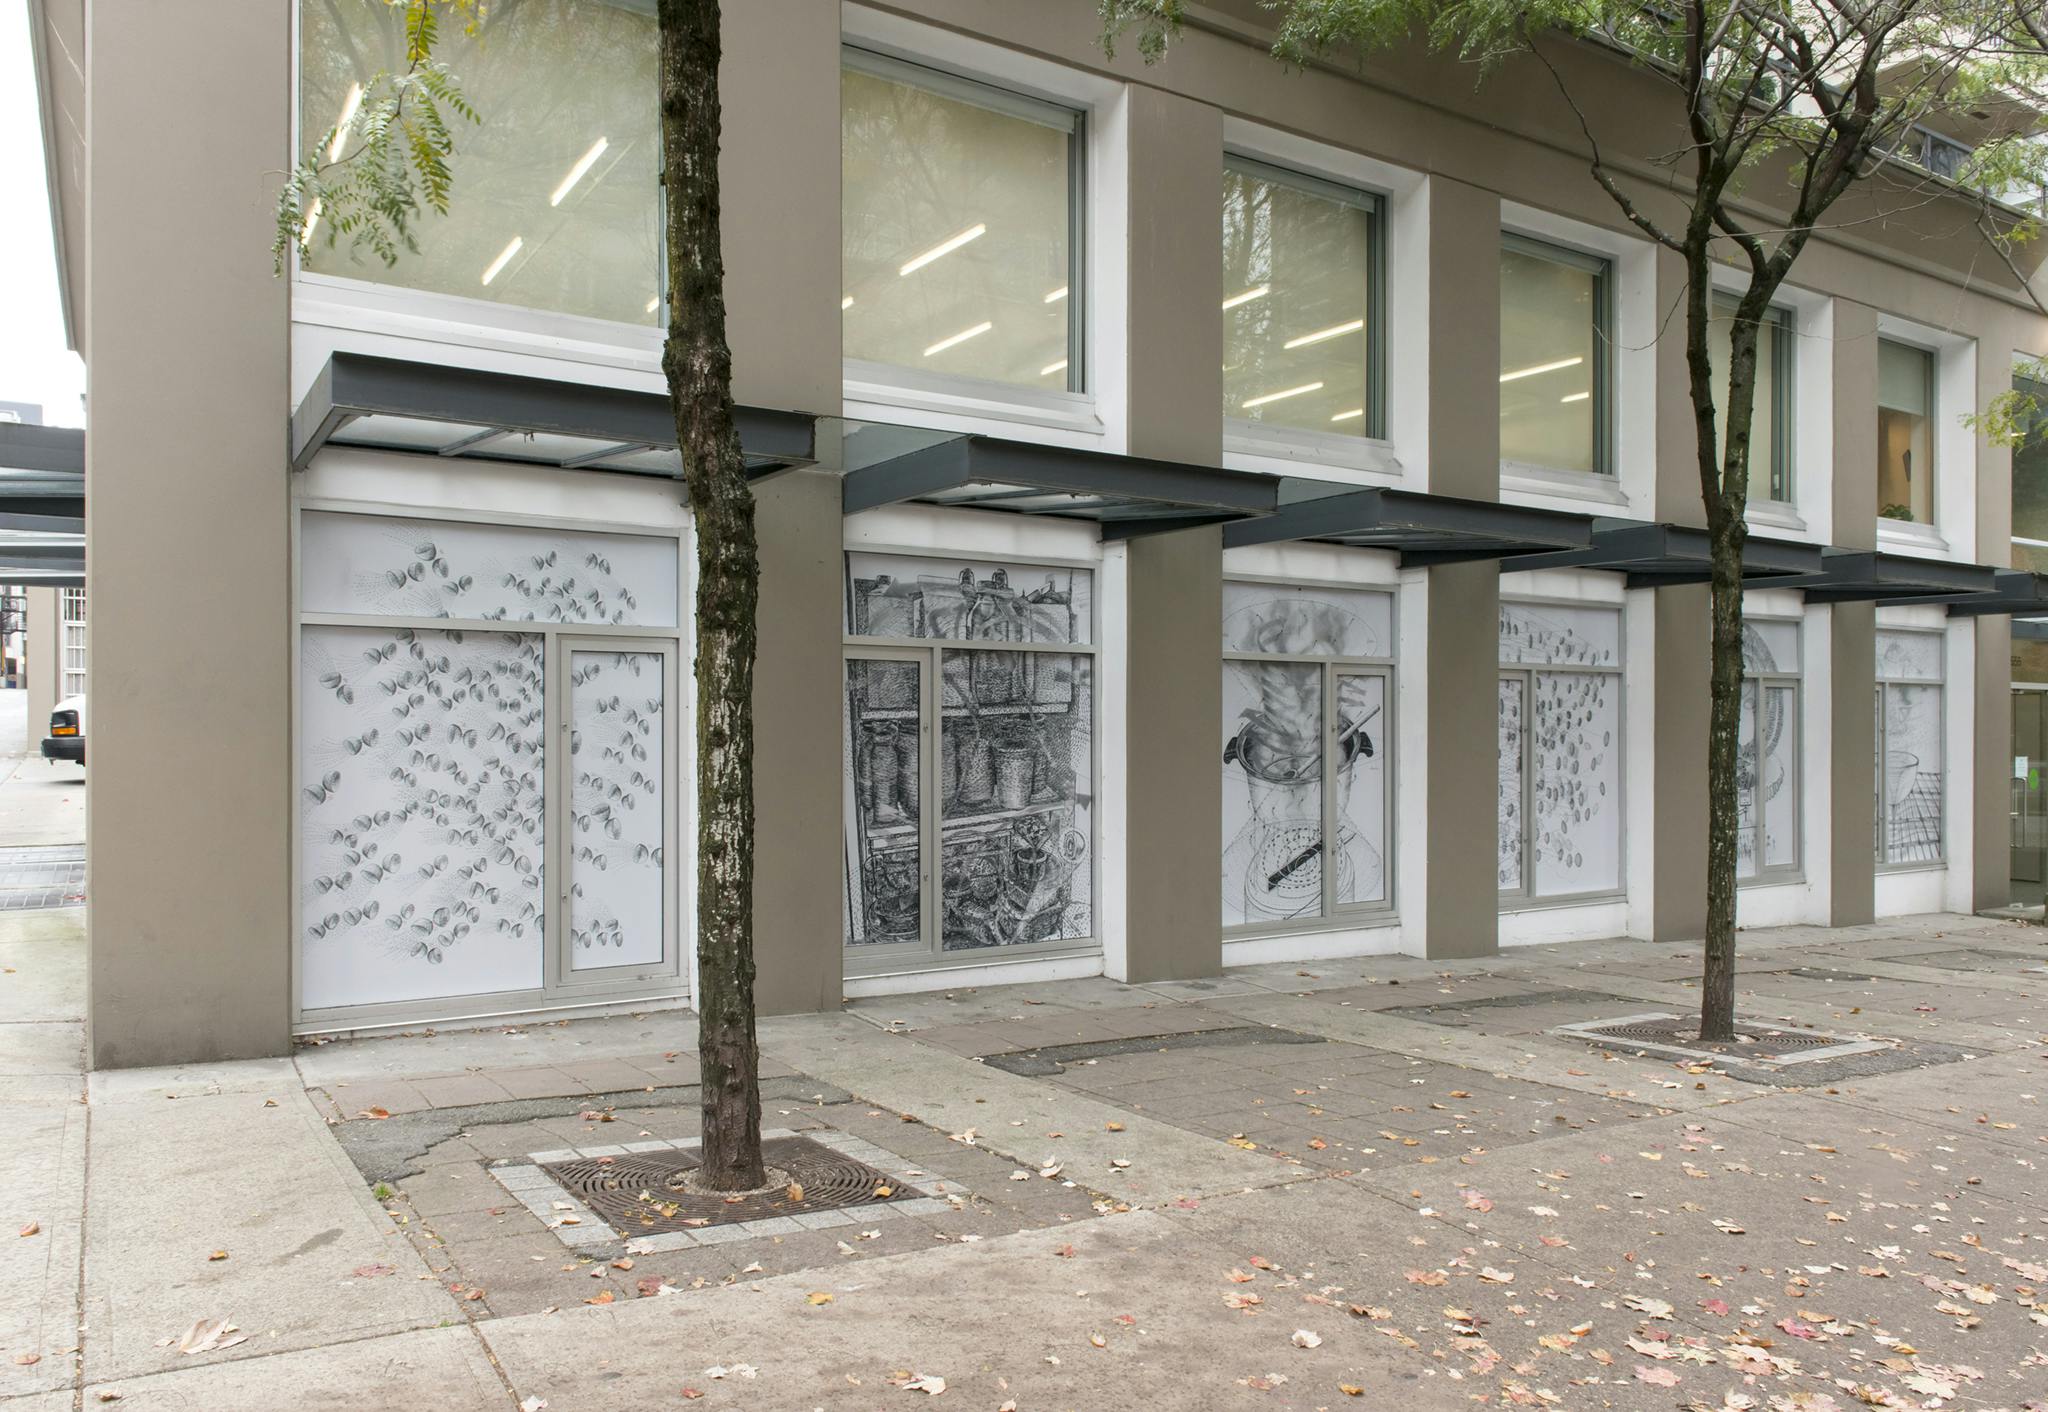 Exterior image of CAG with the work of Ingrid Koeing installed on the ground floor facade windows. Six windows display six, large-scale vinyl prints of back and white graphite drawings. 